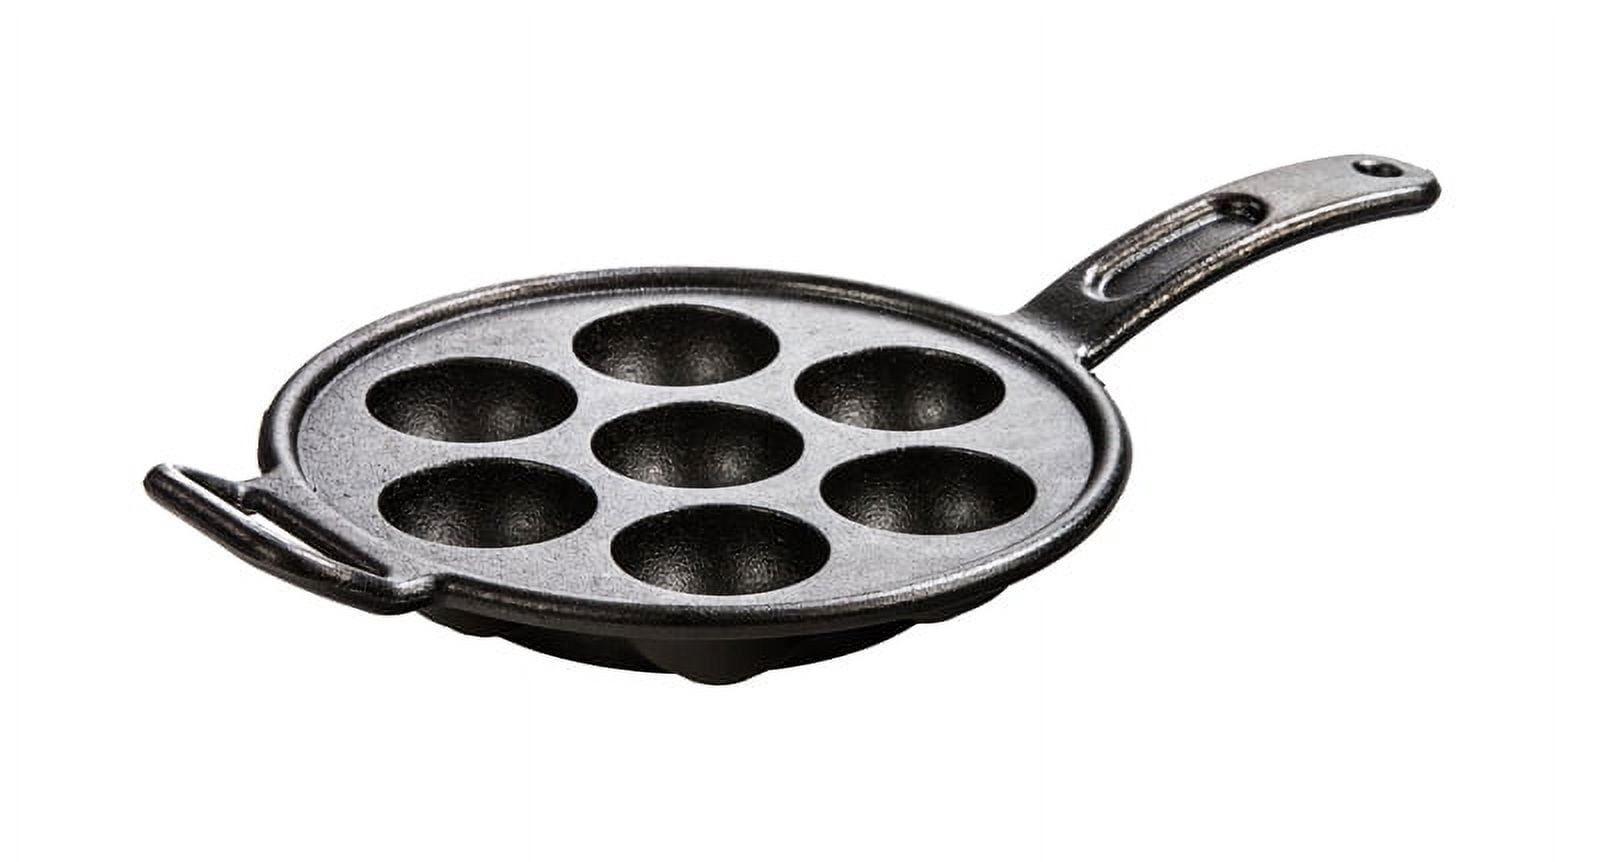 KitchenCraft KCDANPAN Aebleskiver Pan with 7 Holes and Aebleskiver Recipe,  Cast Iron, 20.5 cm, Black